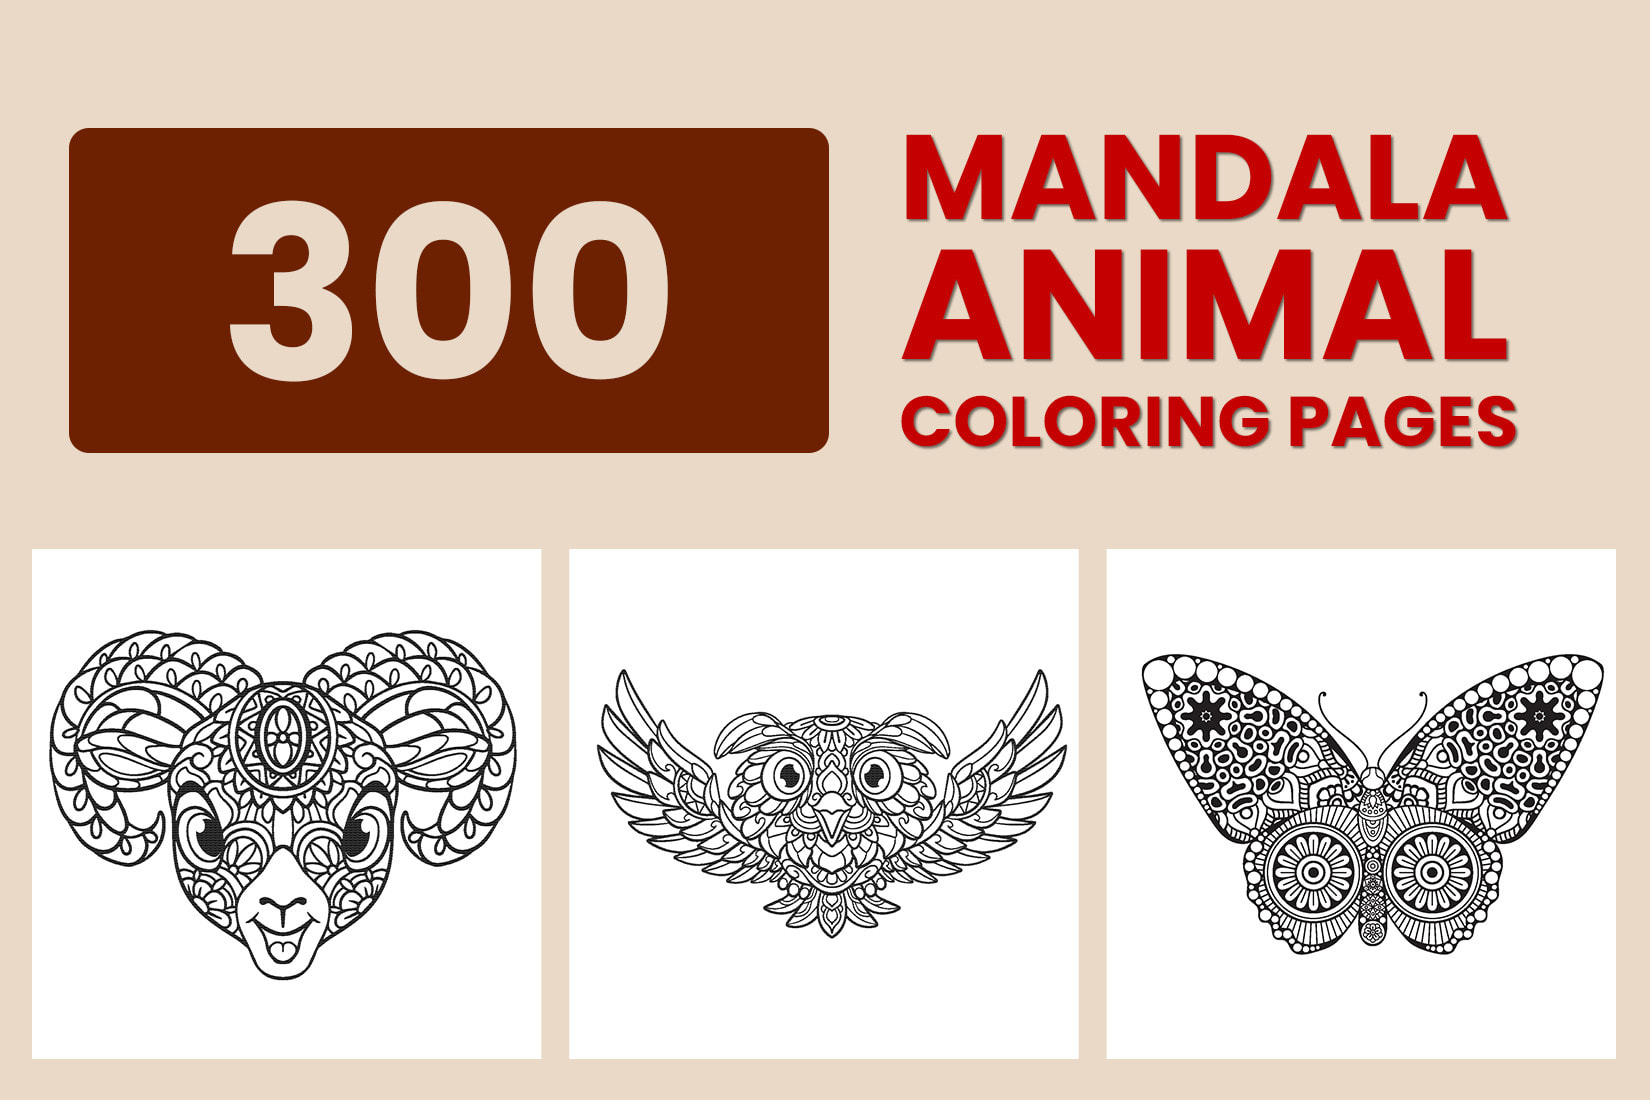 Design 300 animal mandala coloring pages for kids and adults by Vindyherath  | Fiverr